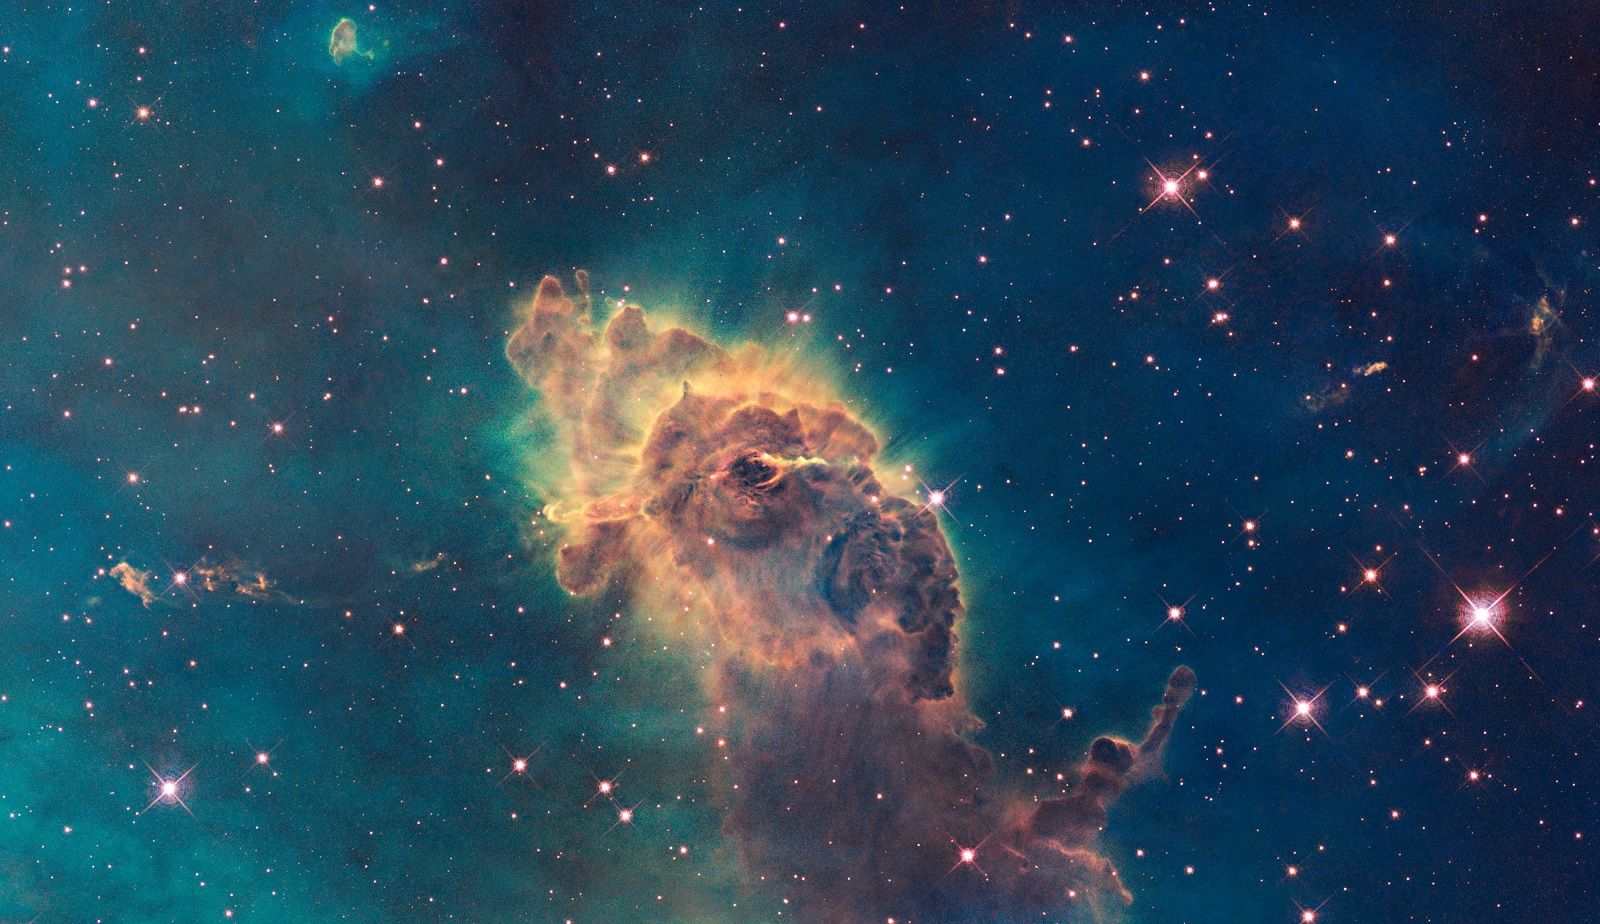 Astounding images from the depths of the Universe courtesy of the Hubble Space Telescope image 19